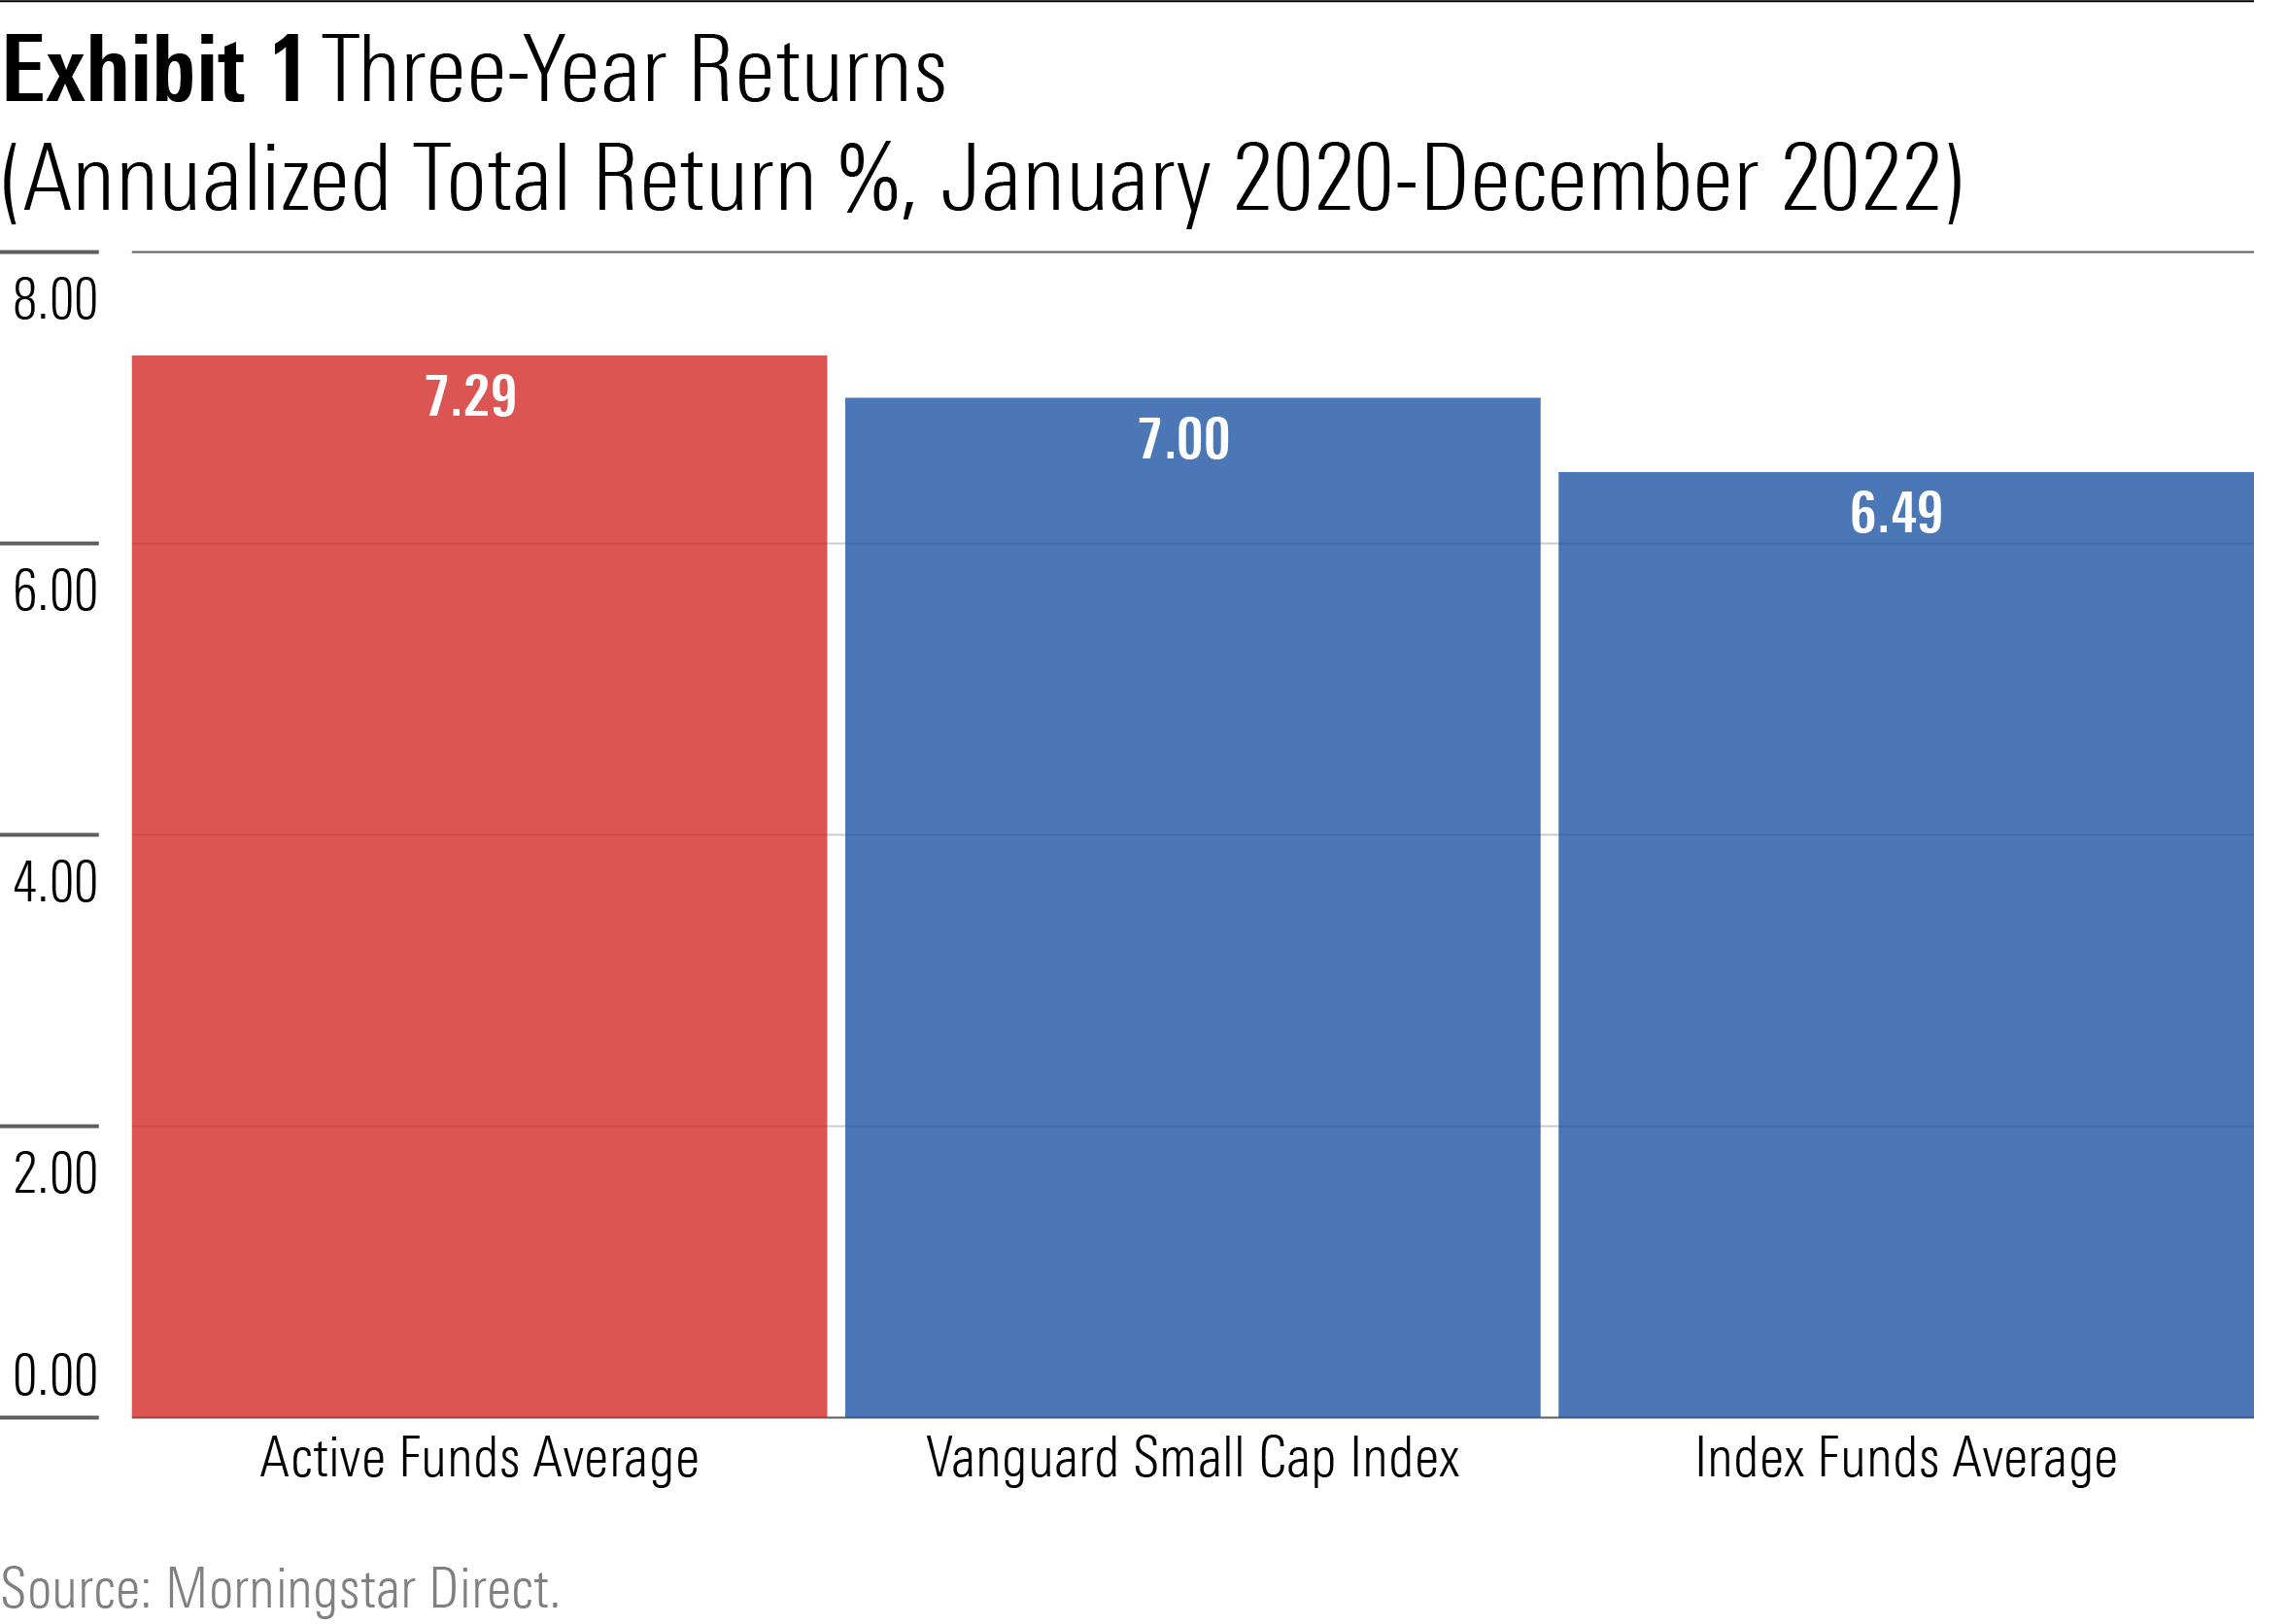 A bar chart showing the peformance of 1) small-company value index funds, 2) actively run small-company value funds, and 3) Vanguard Small Cap Value Index over the past 3 years, through December 2022.